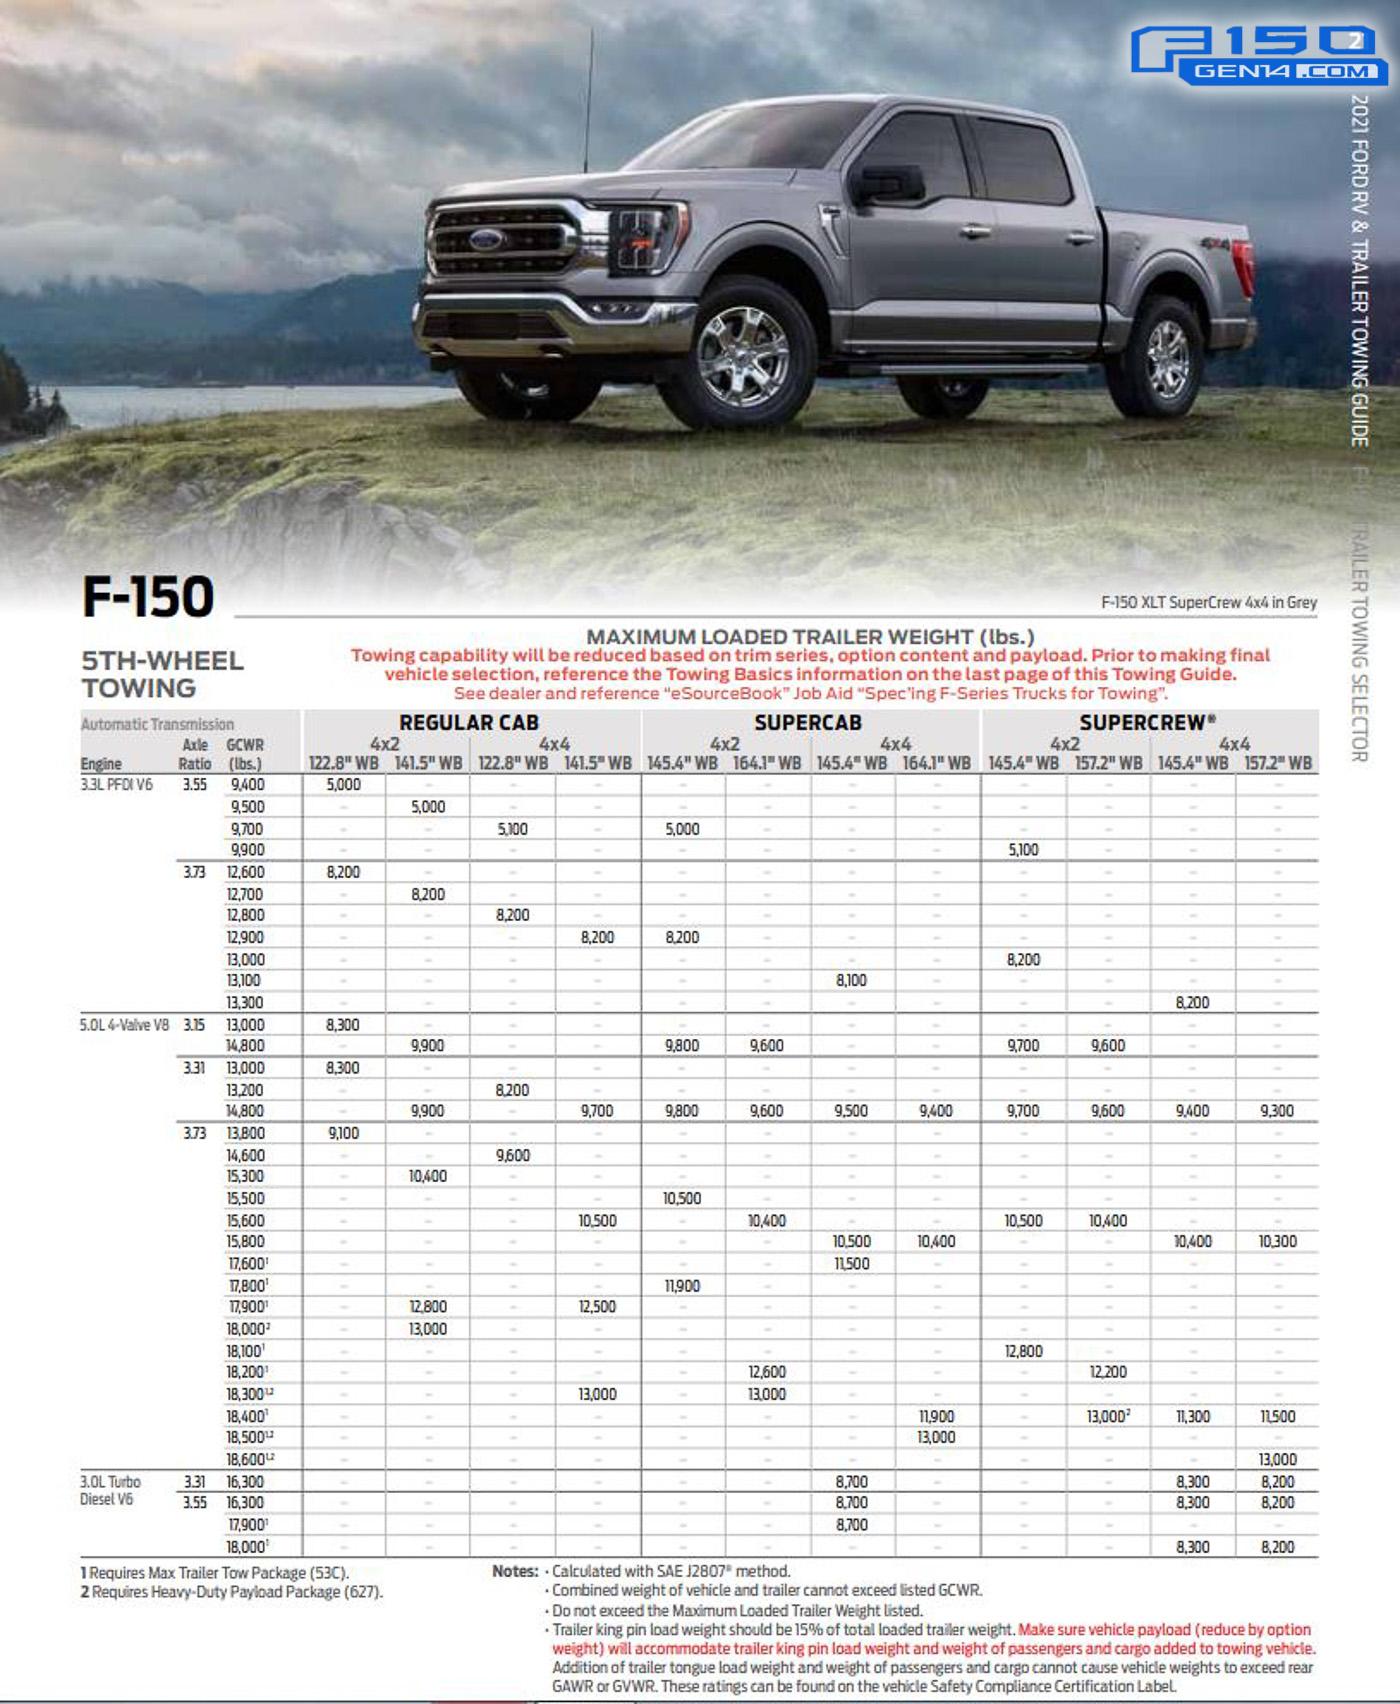 Ford F150 2 7 Towing Capacity - www.inf-inet.com